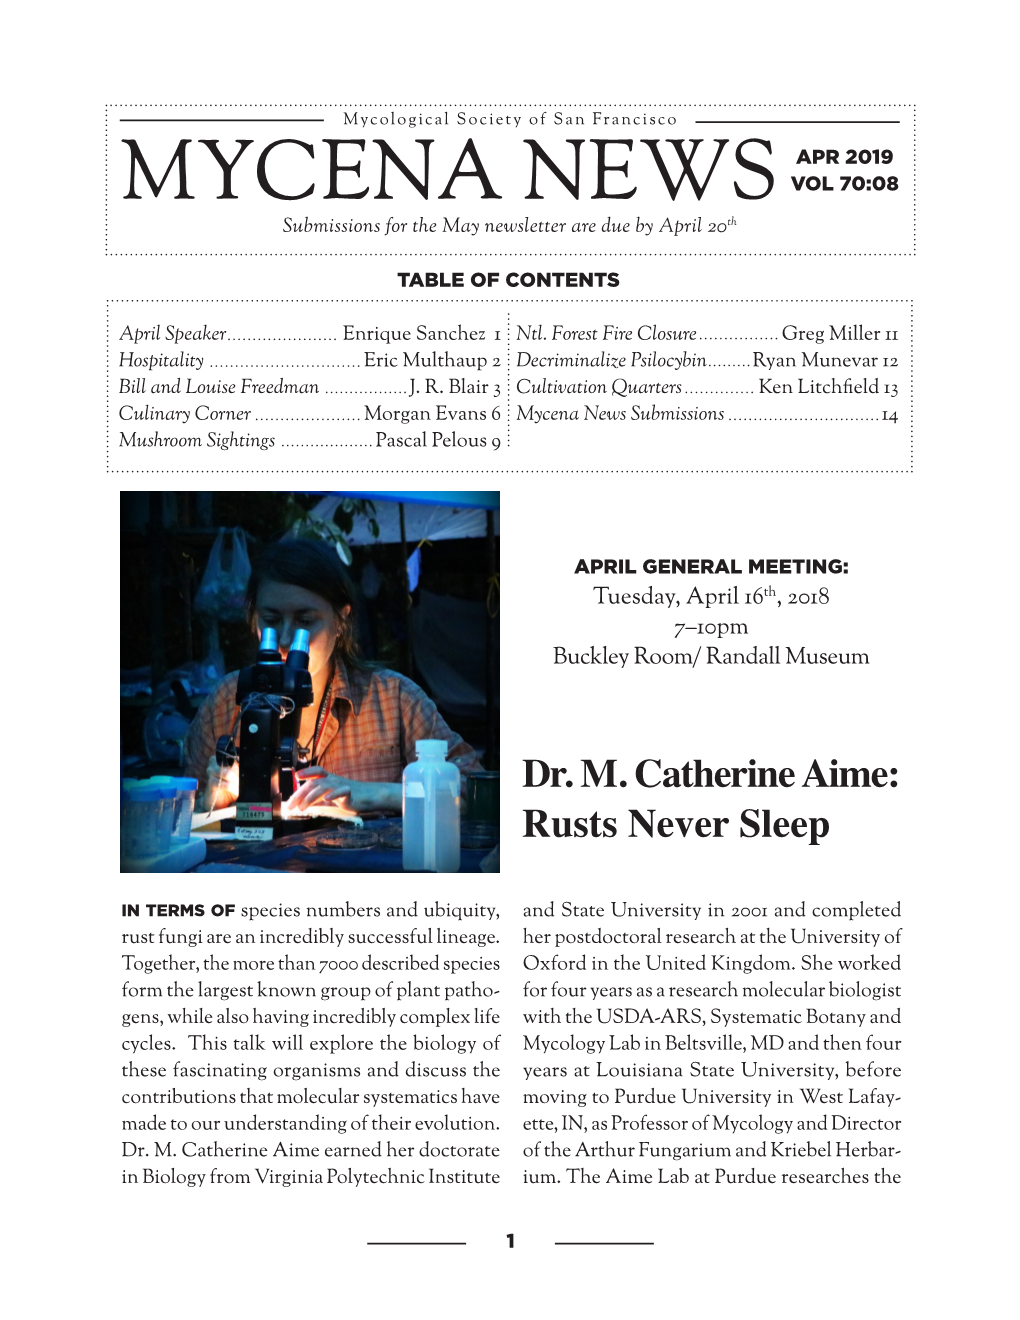 MYCENA Newsth Submissions for the May Newsletter Are Due by April 20